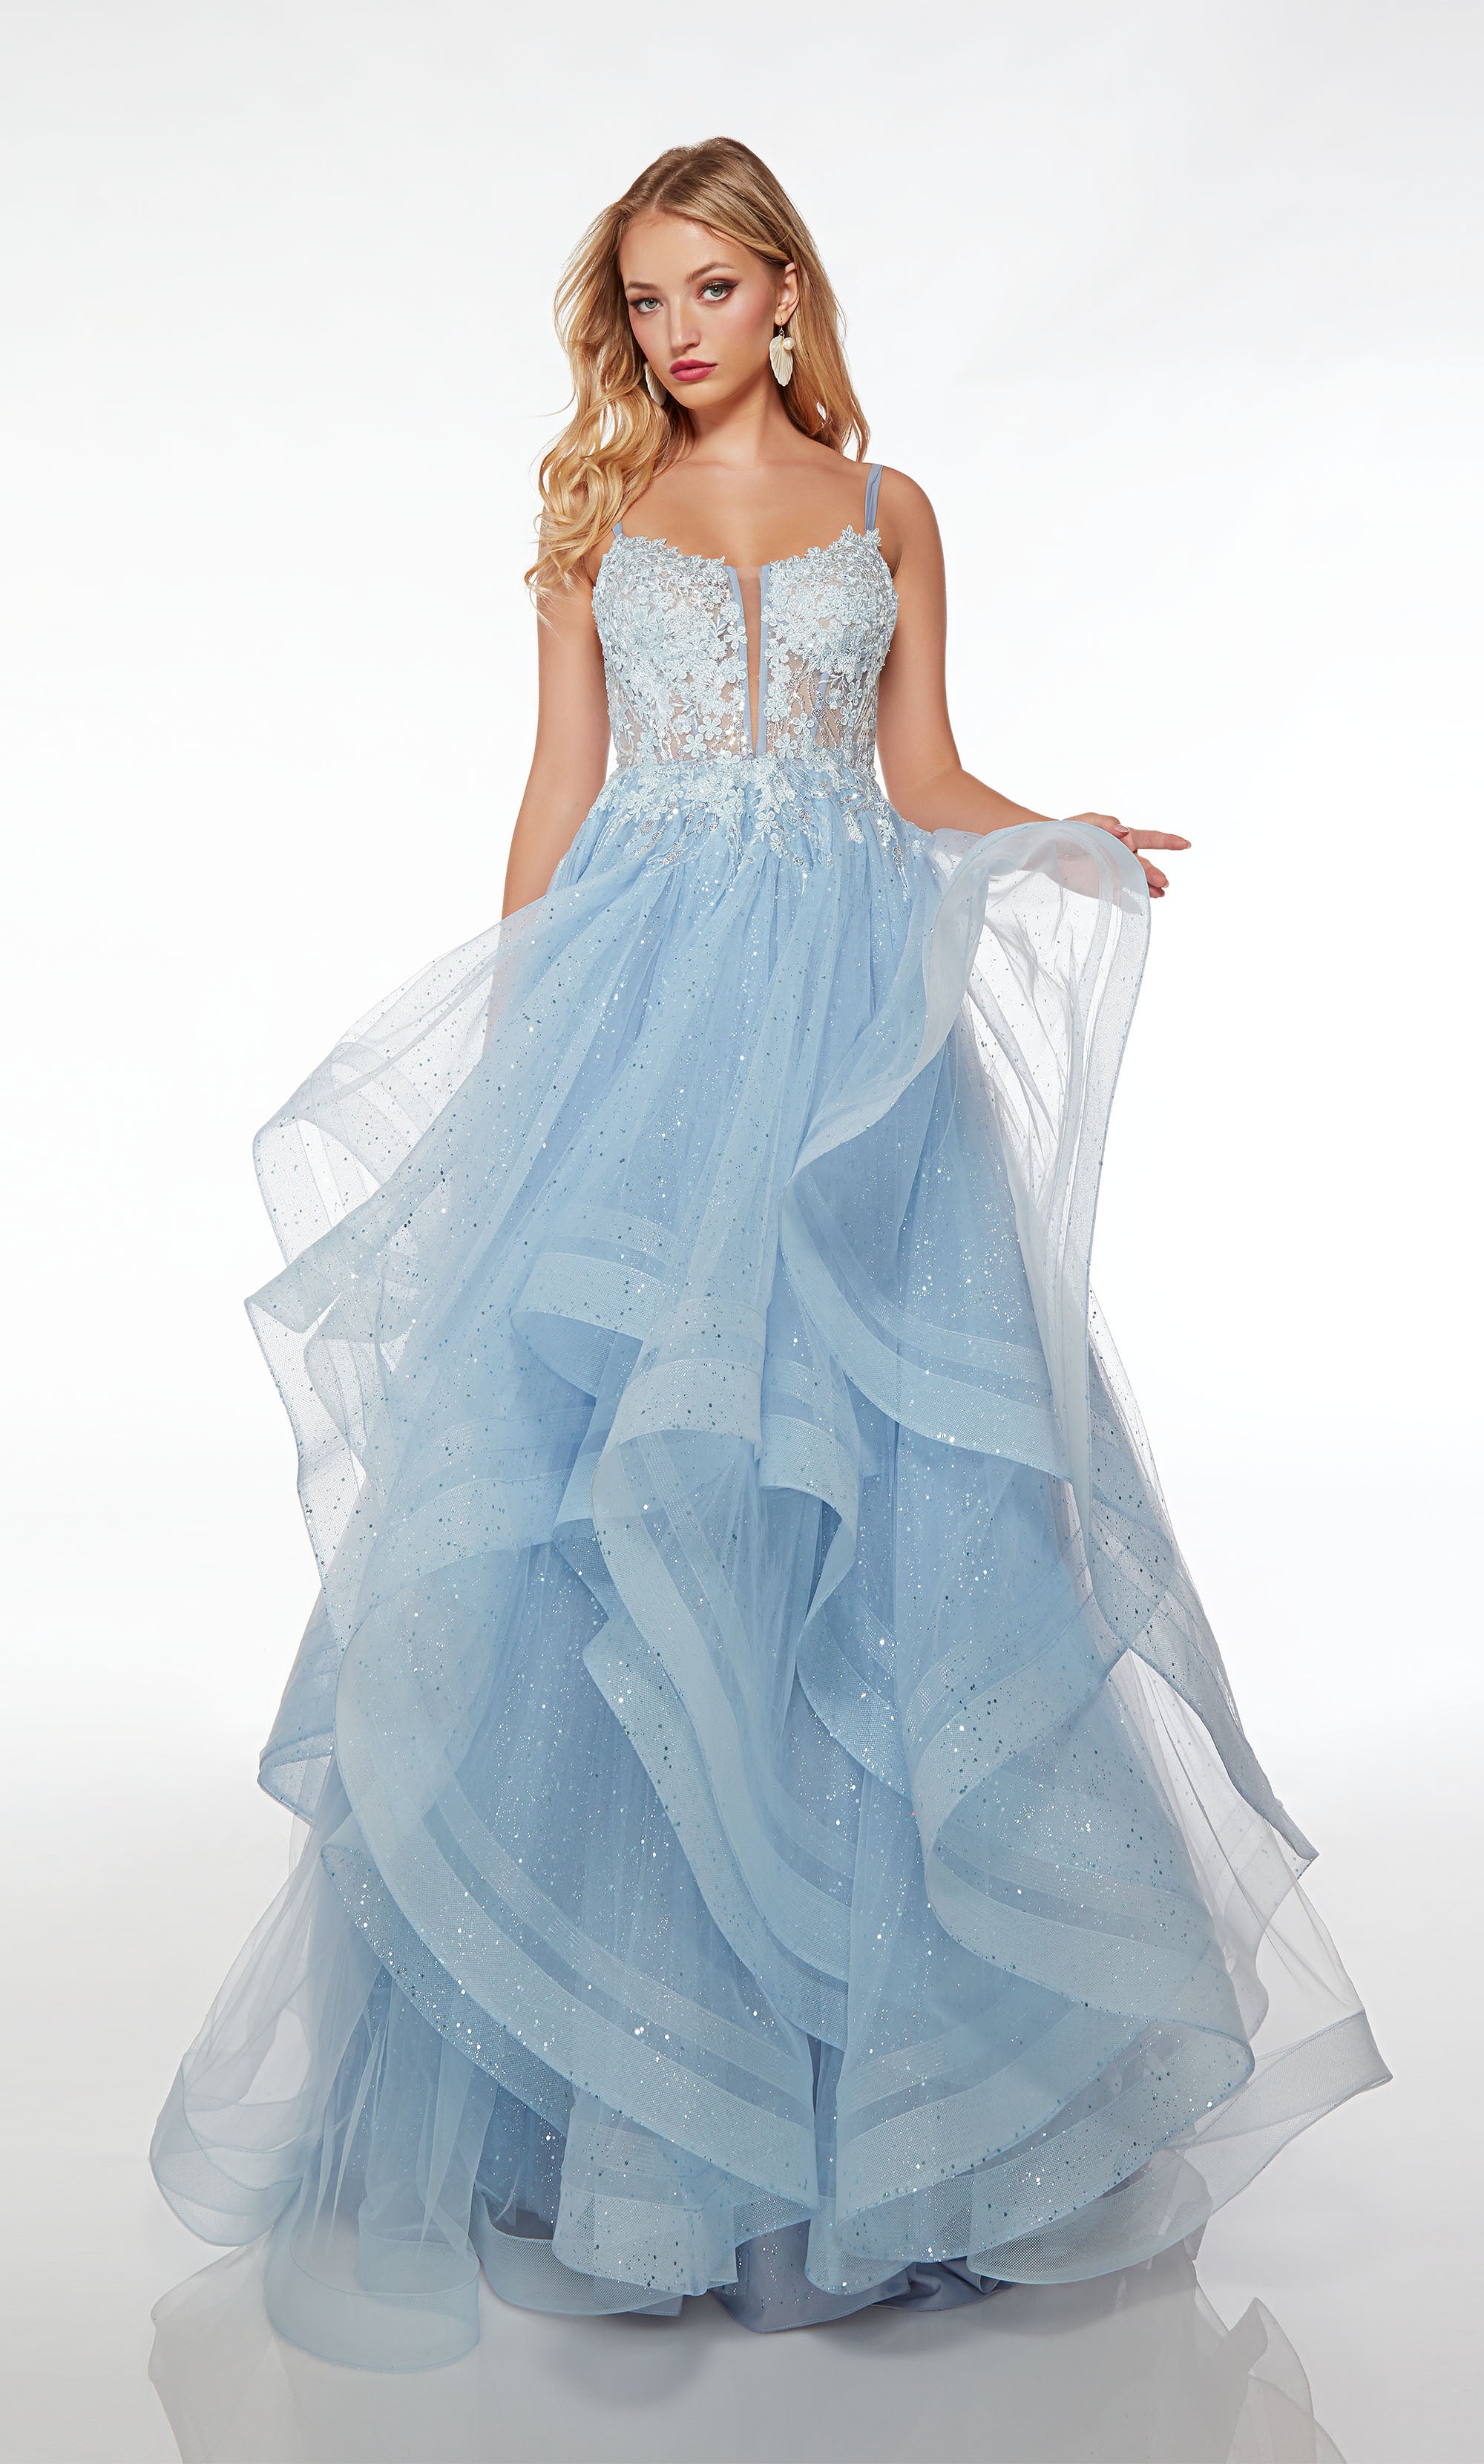 Choosing a Quinceanera Dress if you want to Minimize Bust Area. –